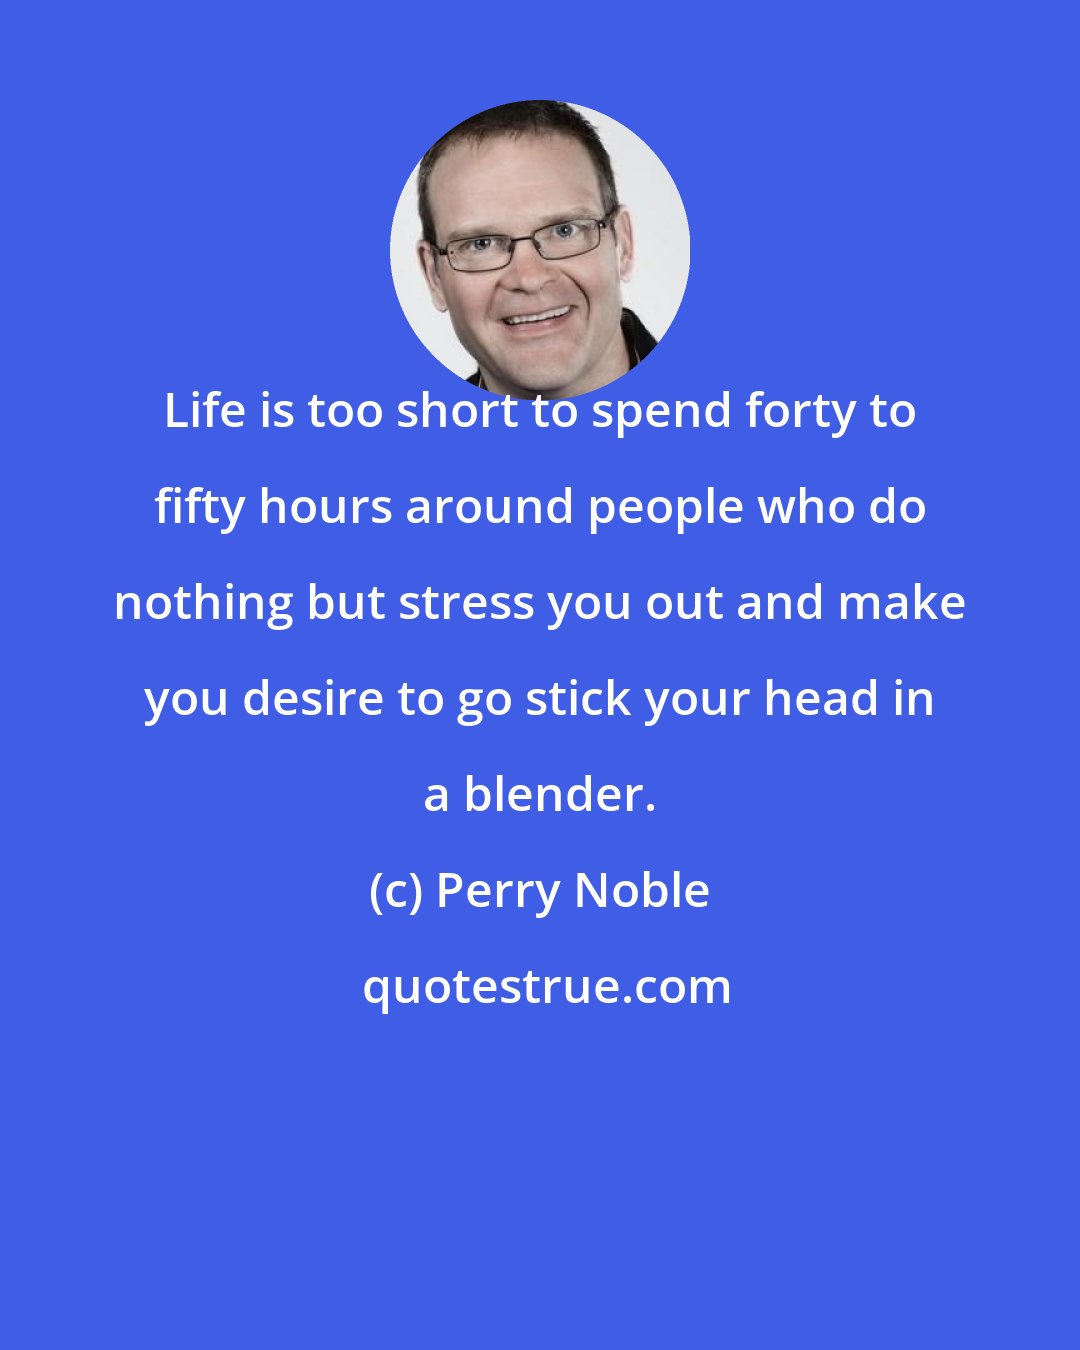 Perry Noble: Life is too short to spend forty to fifty hours around people who do nothing but stress you out and make you desire to go stick your head in a blender.